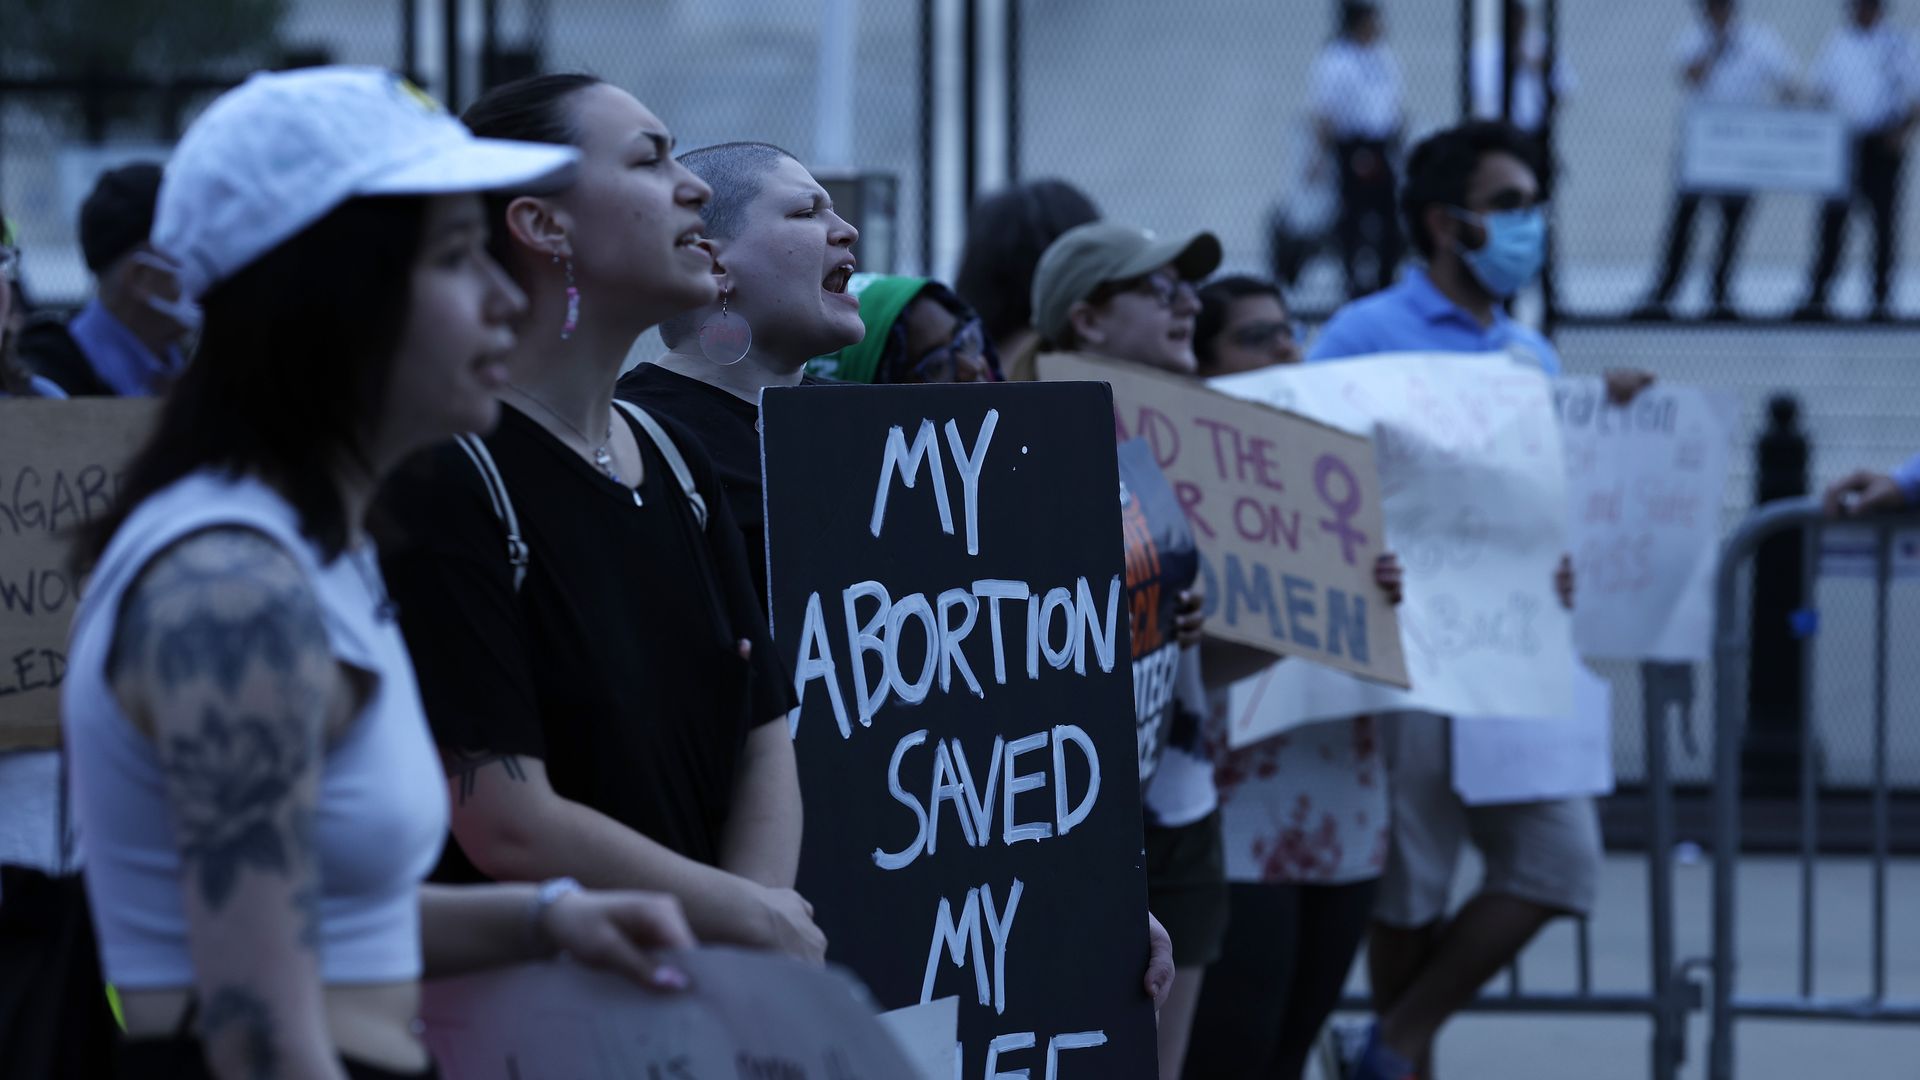 Photo of abortion rights protesters holding signs that say "My abortion saved my life"